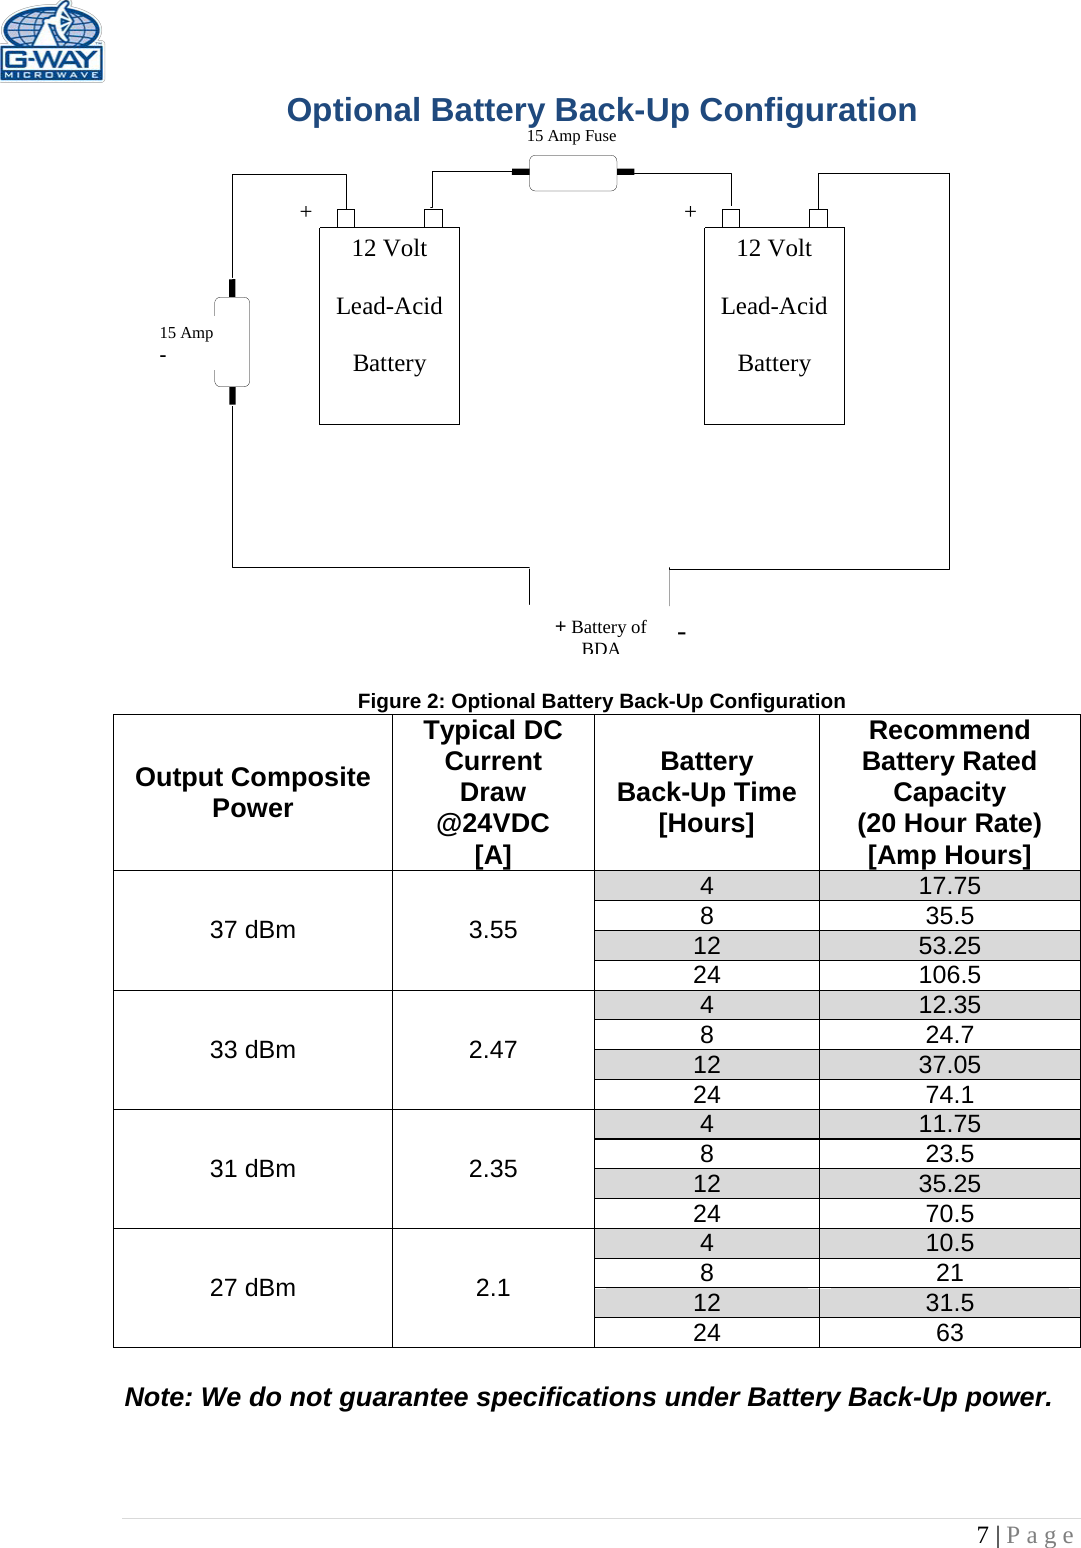   7 | Page  15 Amp Fuse 15 Amp -       12 Volt  Lead-Acid  Battery  12 Volt  Lead-Acid  Battery  + + + Battery of  BDA - Optional Battery Back-Up Configuration                  Figure 2: Optional Battery Back-Up Configuration Output Composite Power Typical DC Current  Draw @24VDC [A] Battery Back-Up Time [Hours] Recommend Battery Rated Capacity (20 Hour Rate) [Amp Hours] 37 dBm 3.55 4 17.75 8 35.5 12 53.25 24 106.5 33 dBm 2.47 4 12.35 8 24.7 12 37.05 24 74.1 31 dBm  2.35 4 11.75 8 23.5 12 35.25 24 70.5 27 dBm 2.1 4 10.5 8 21 12 31.5 24 63  Note: We do not guarantee specifications under Battery Back-Up power.  